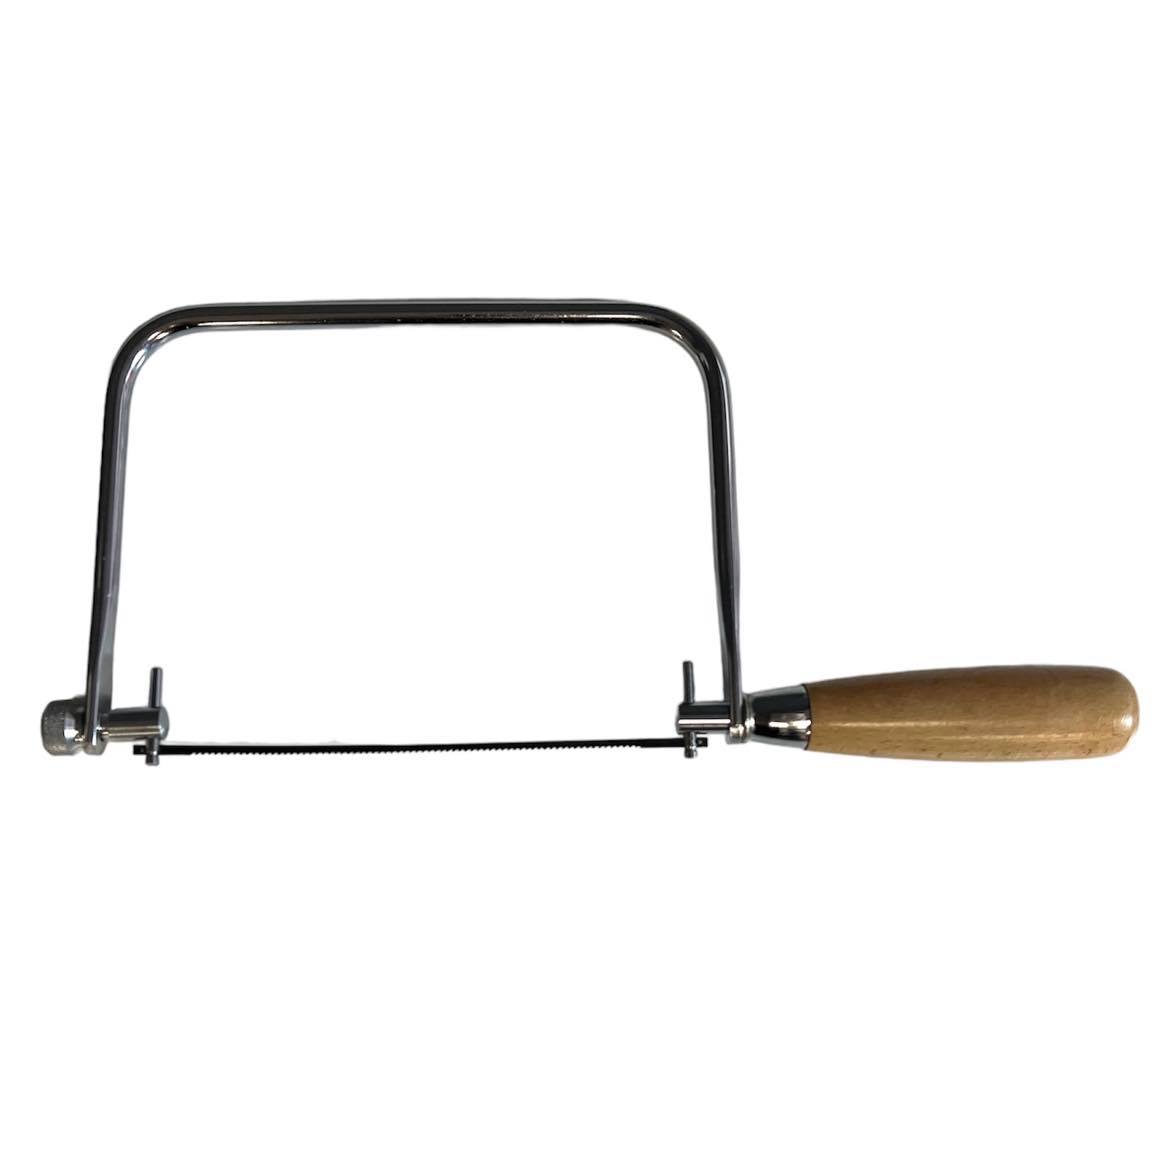 Coping Saw 1900080 by Soba